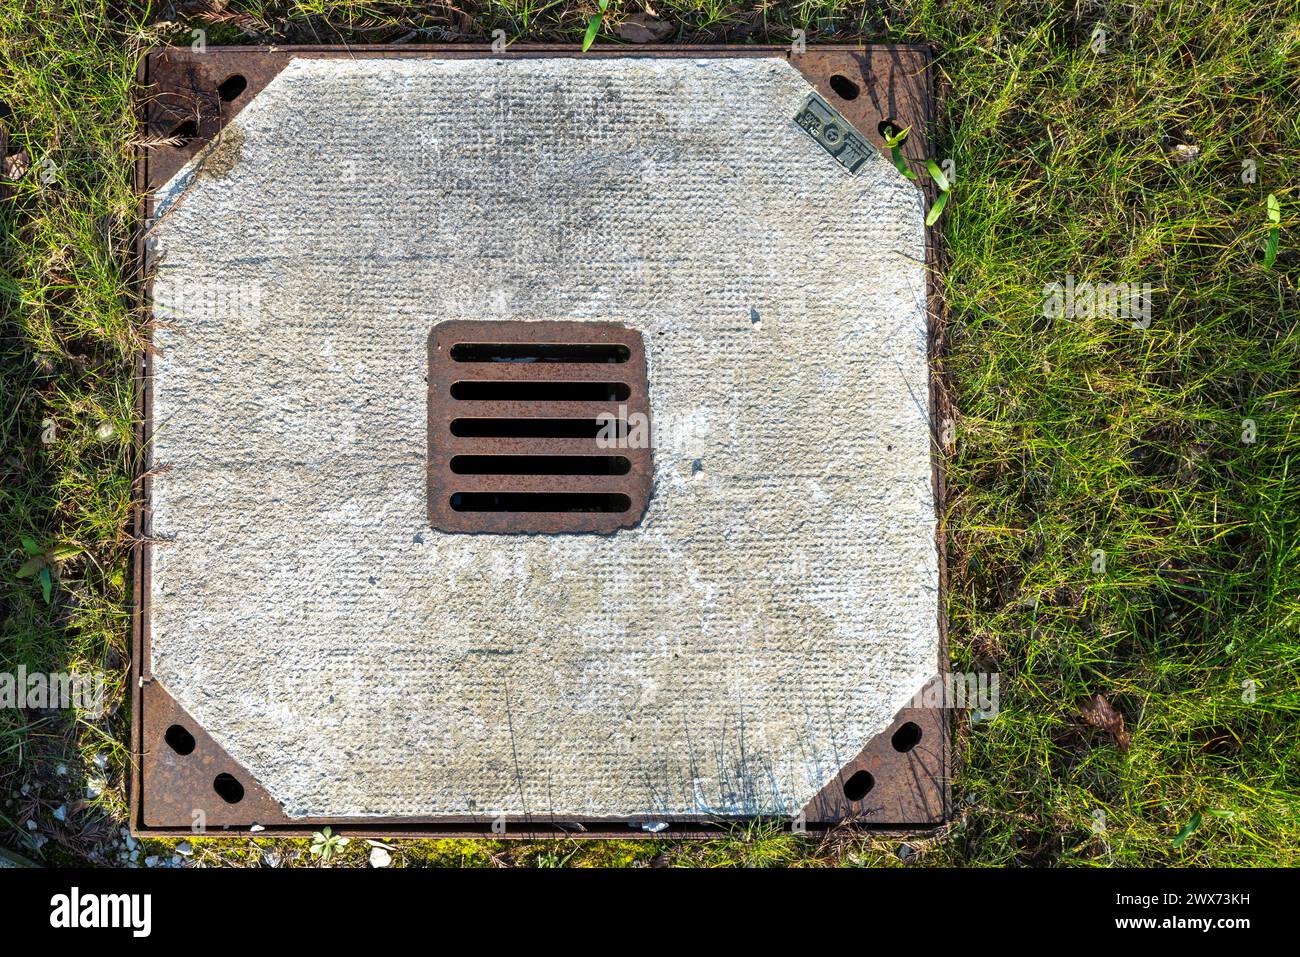 concrete manhole cover in meadow Stock Photo